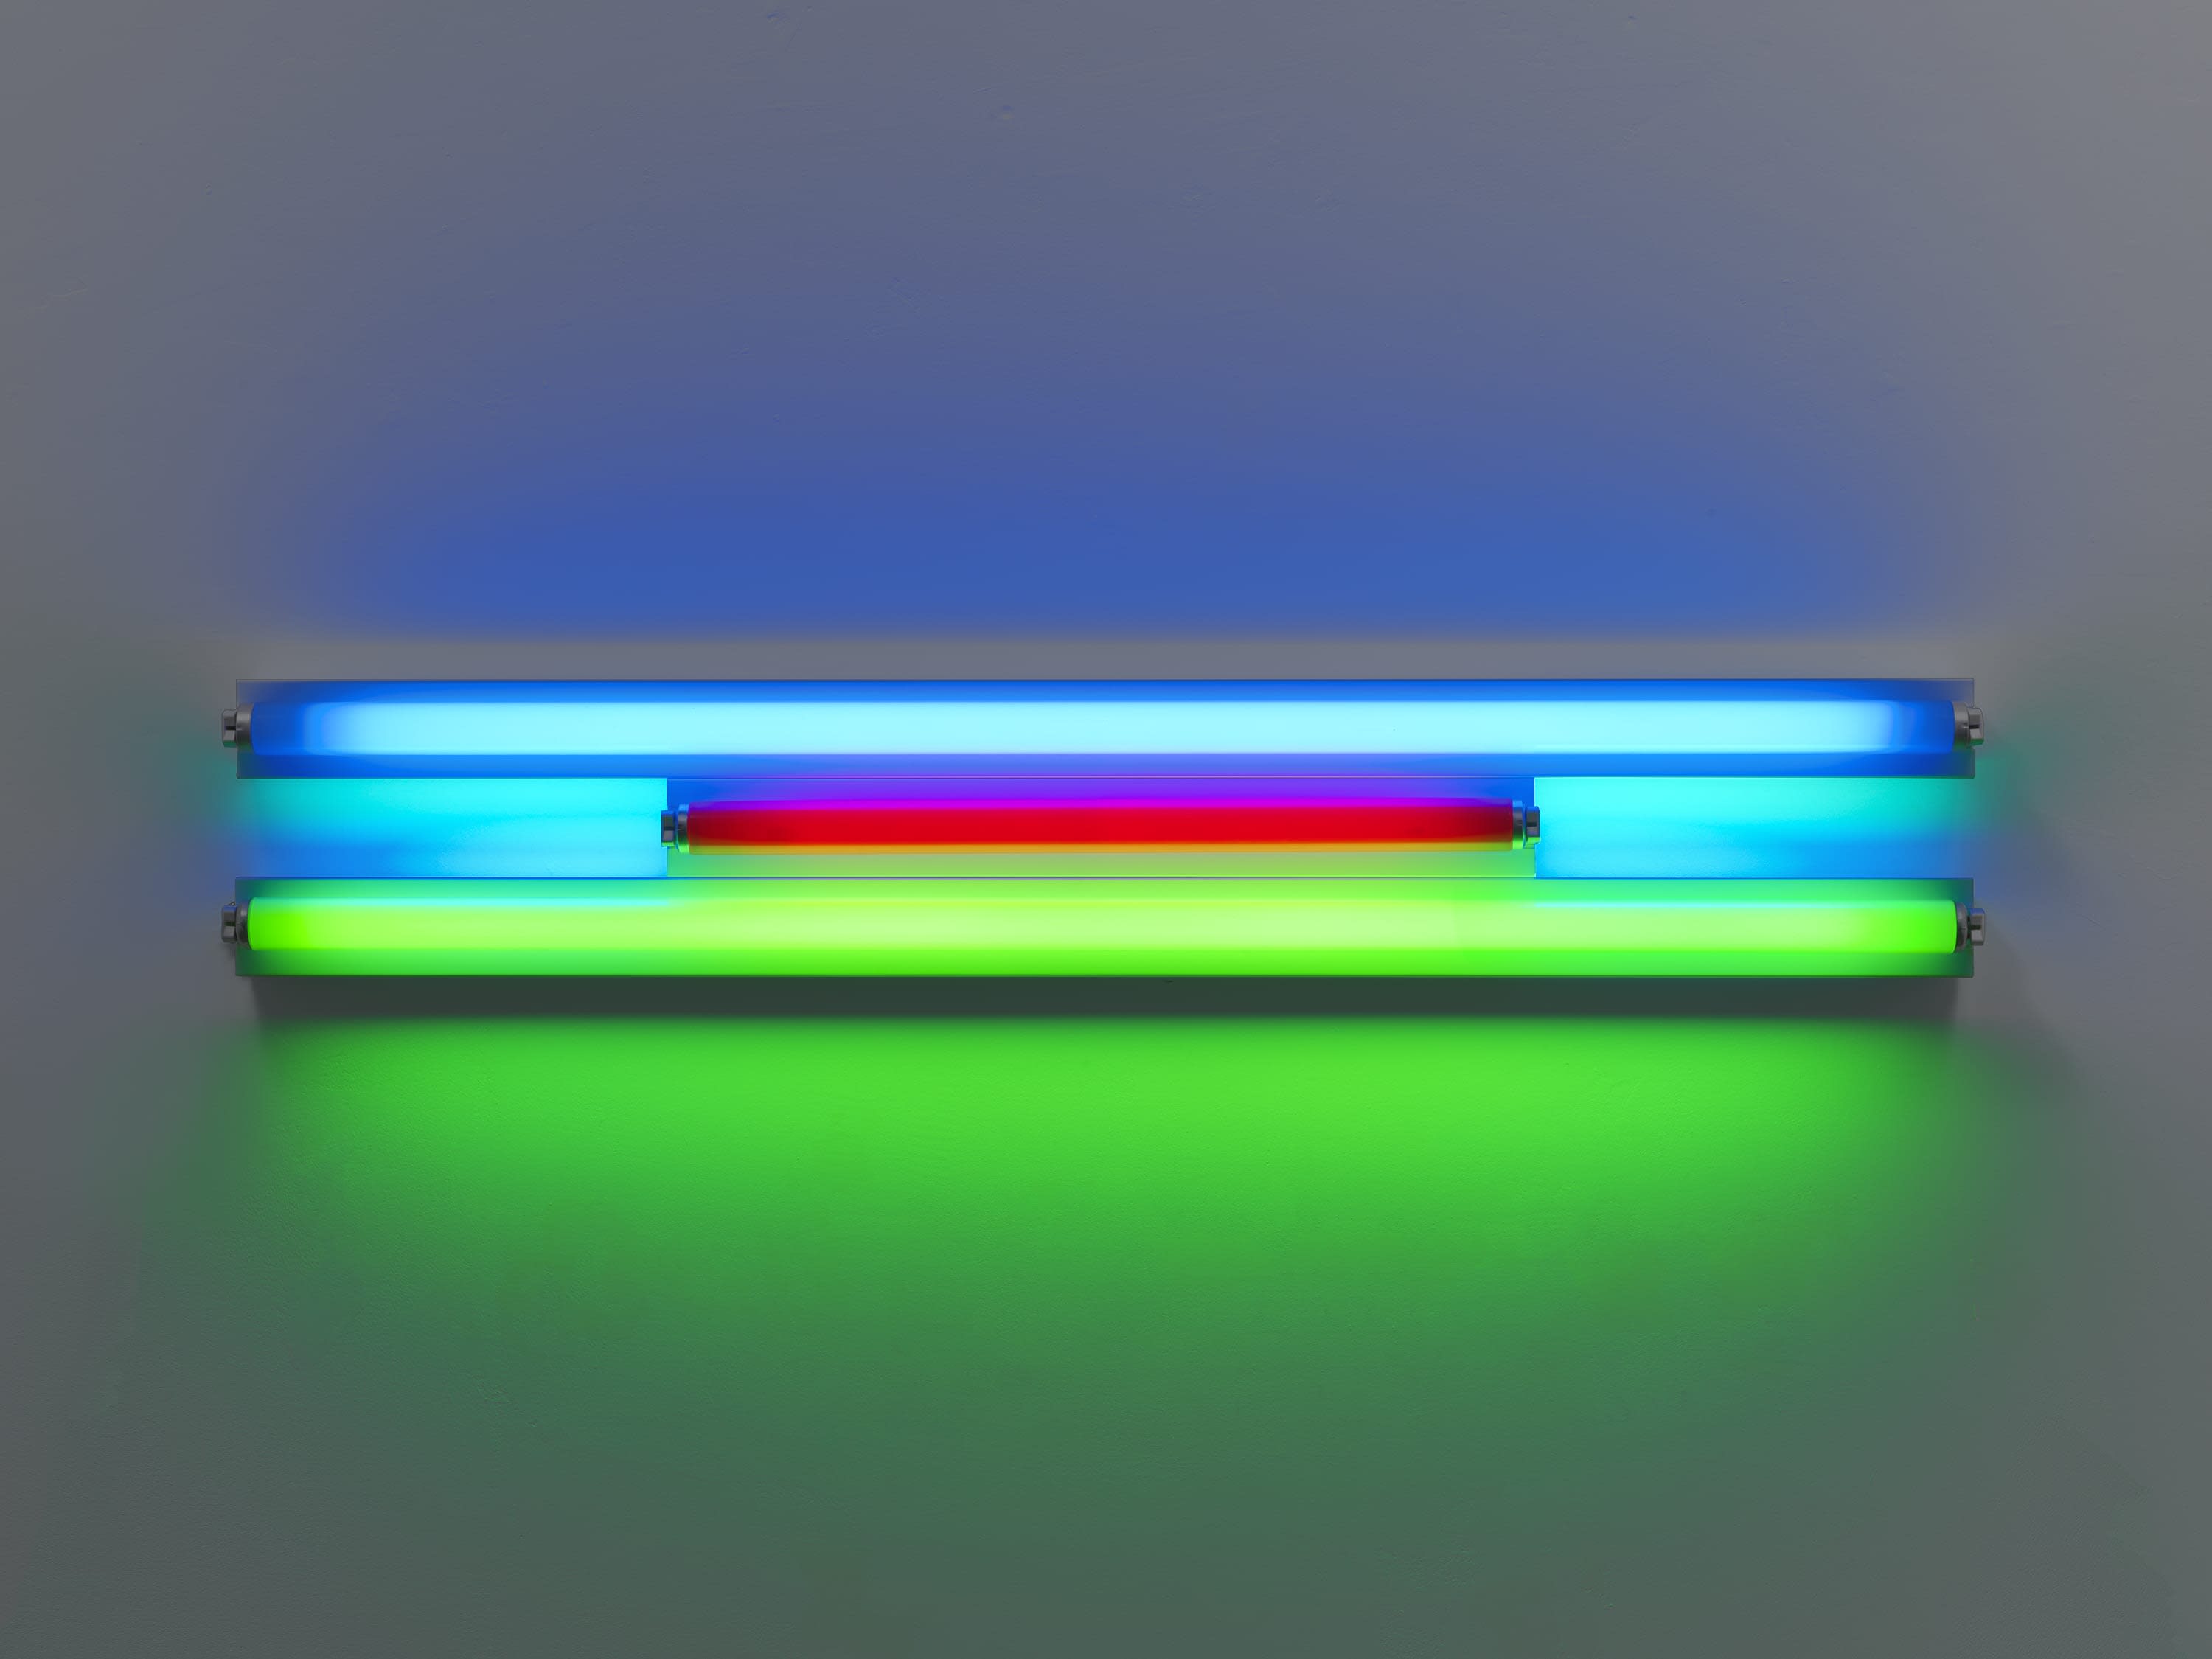 Dan Flavin, Untitled, 1995. Courtesy of the artist's estate and Cardi Gallery.